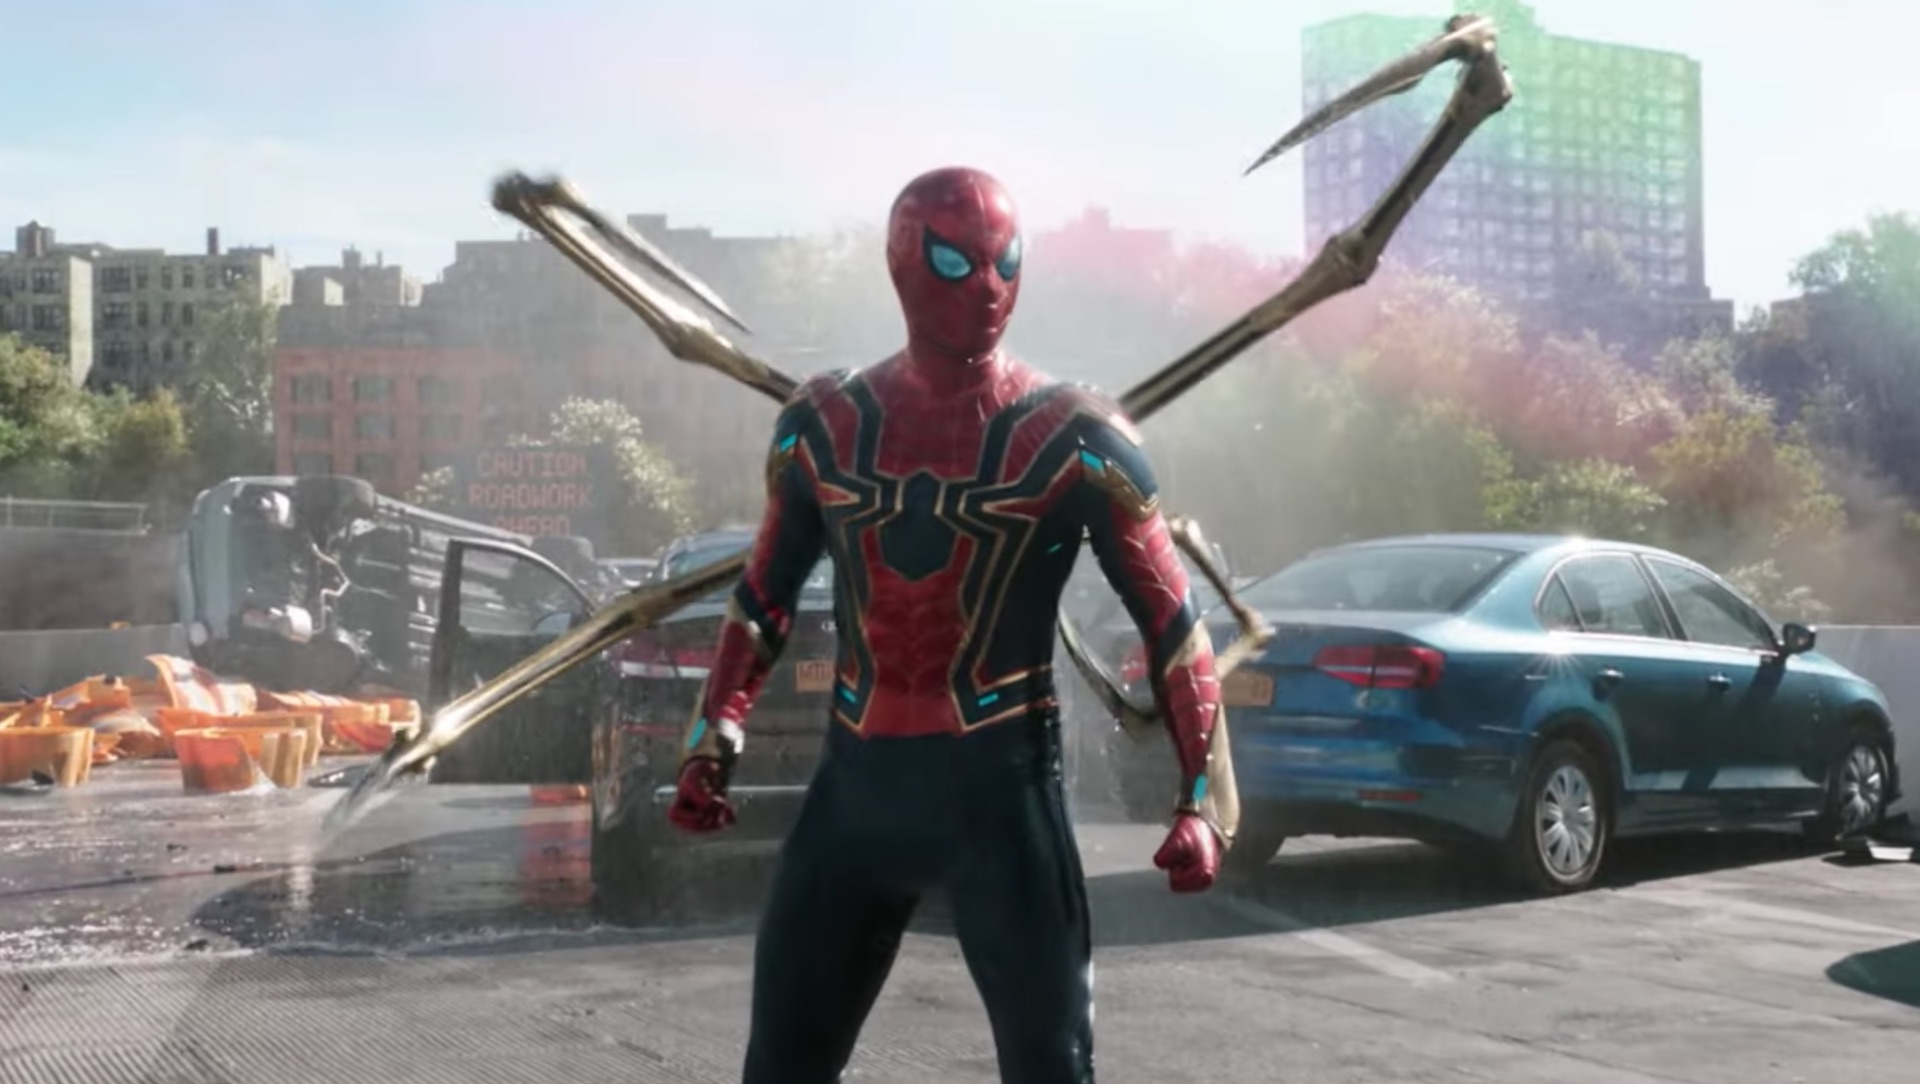 Spider-Man: No Way Home release date, trailer, cast, leaks, and more